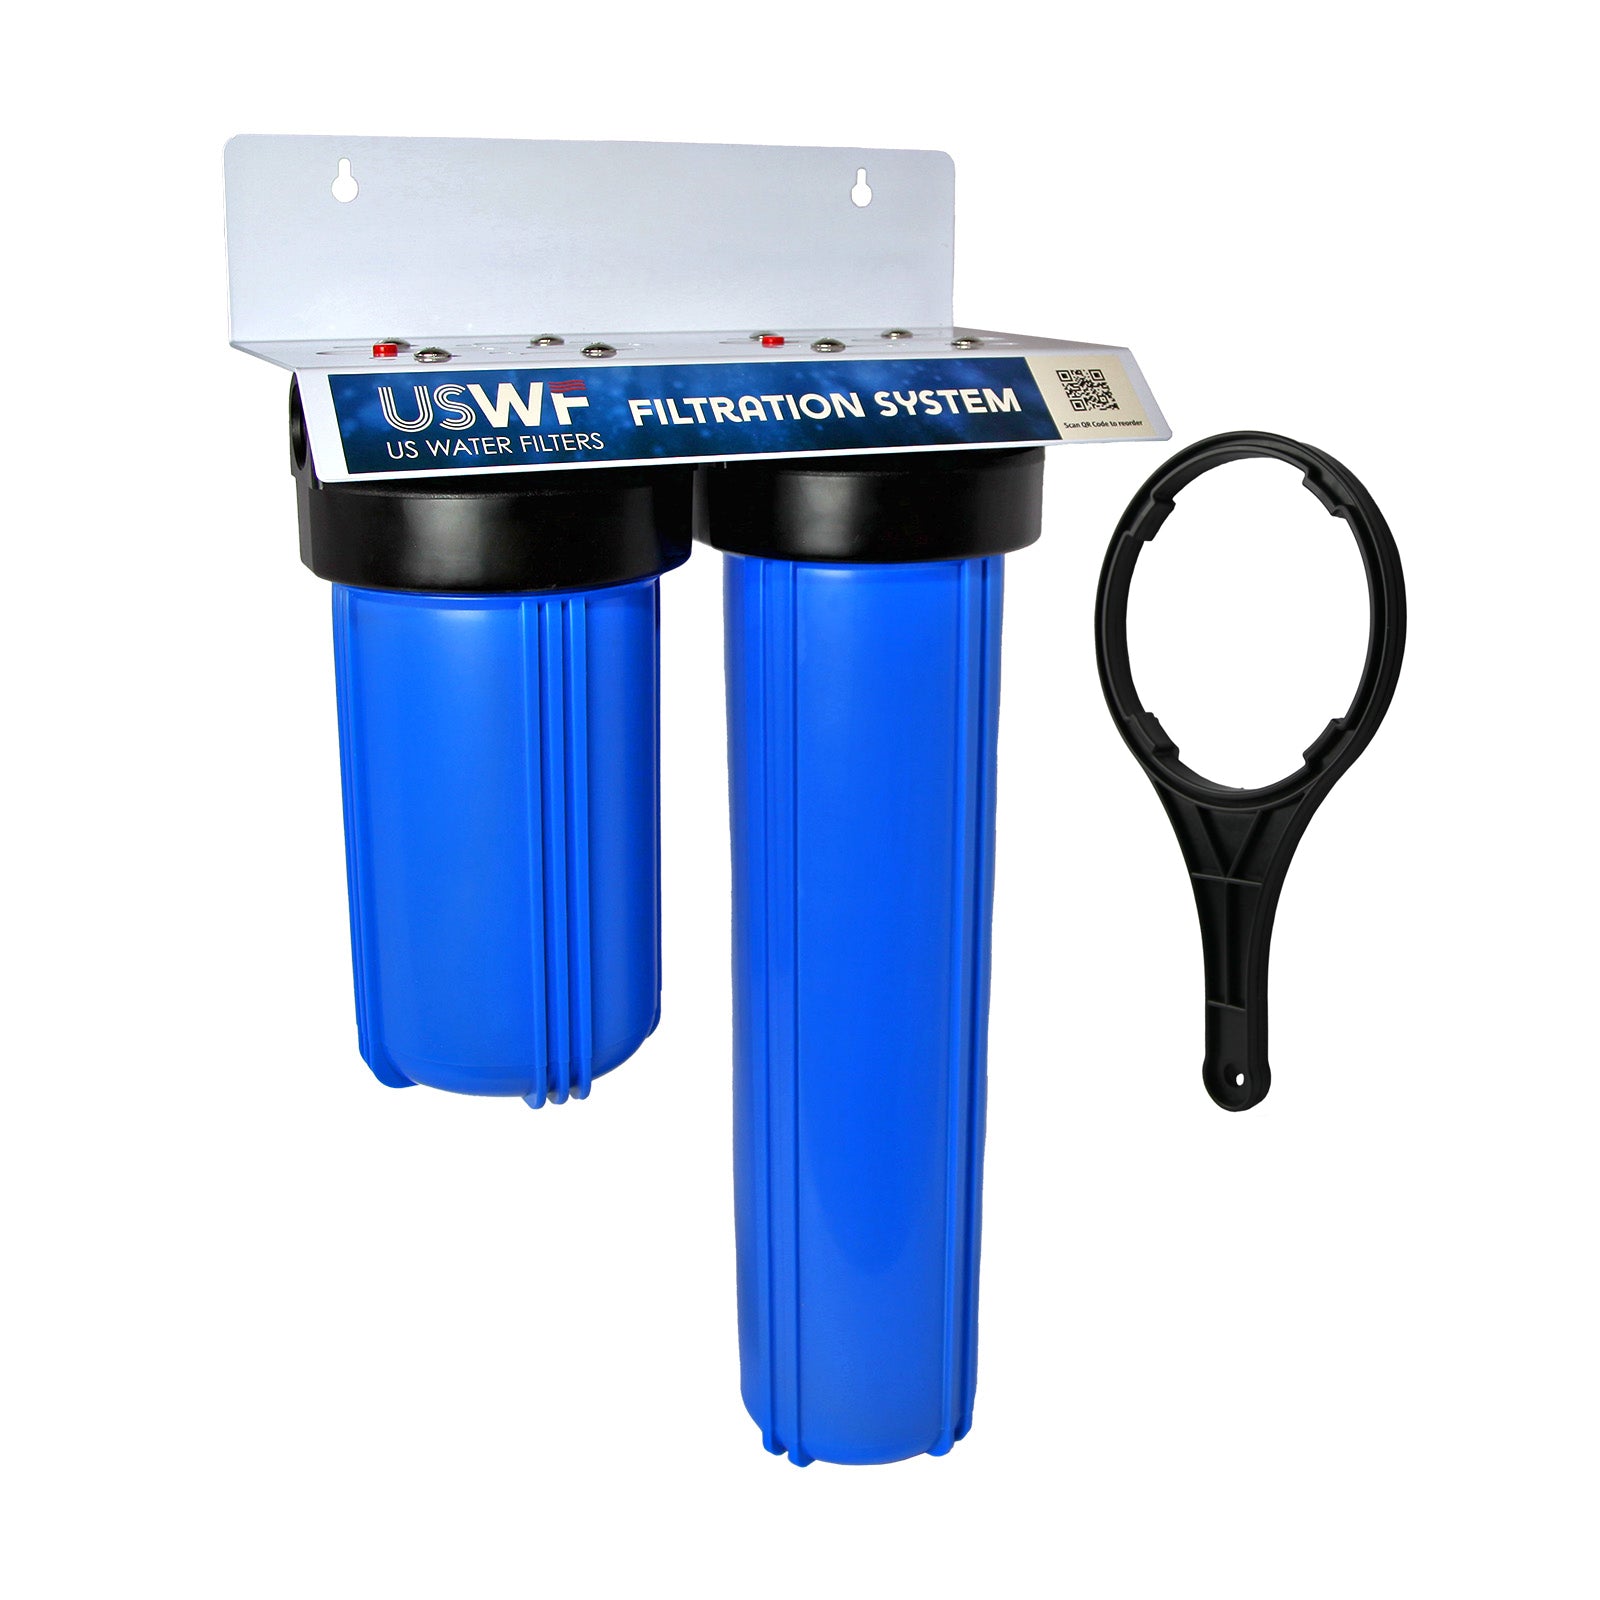 Two-Stage Big Blue 4.5"x10" & 20"  Filter Housing by USWF, 1" Inlet/Outlet, w/mounting bracket & wrench